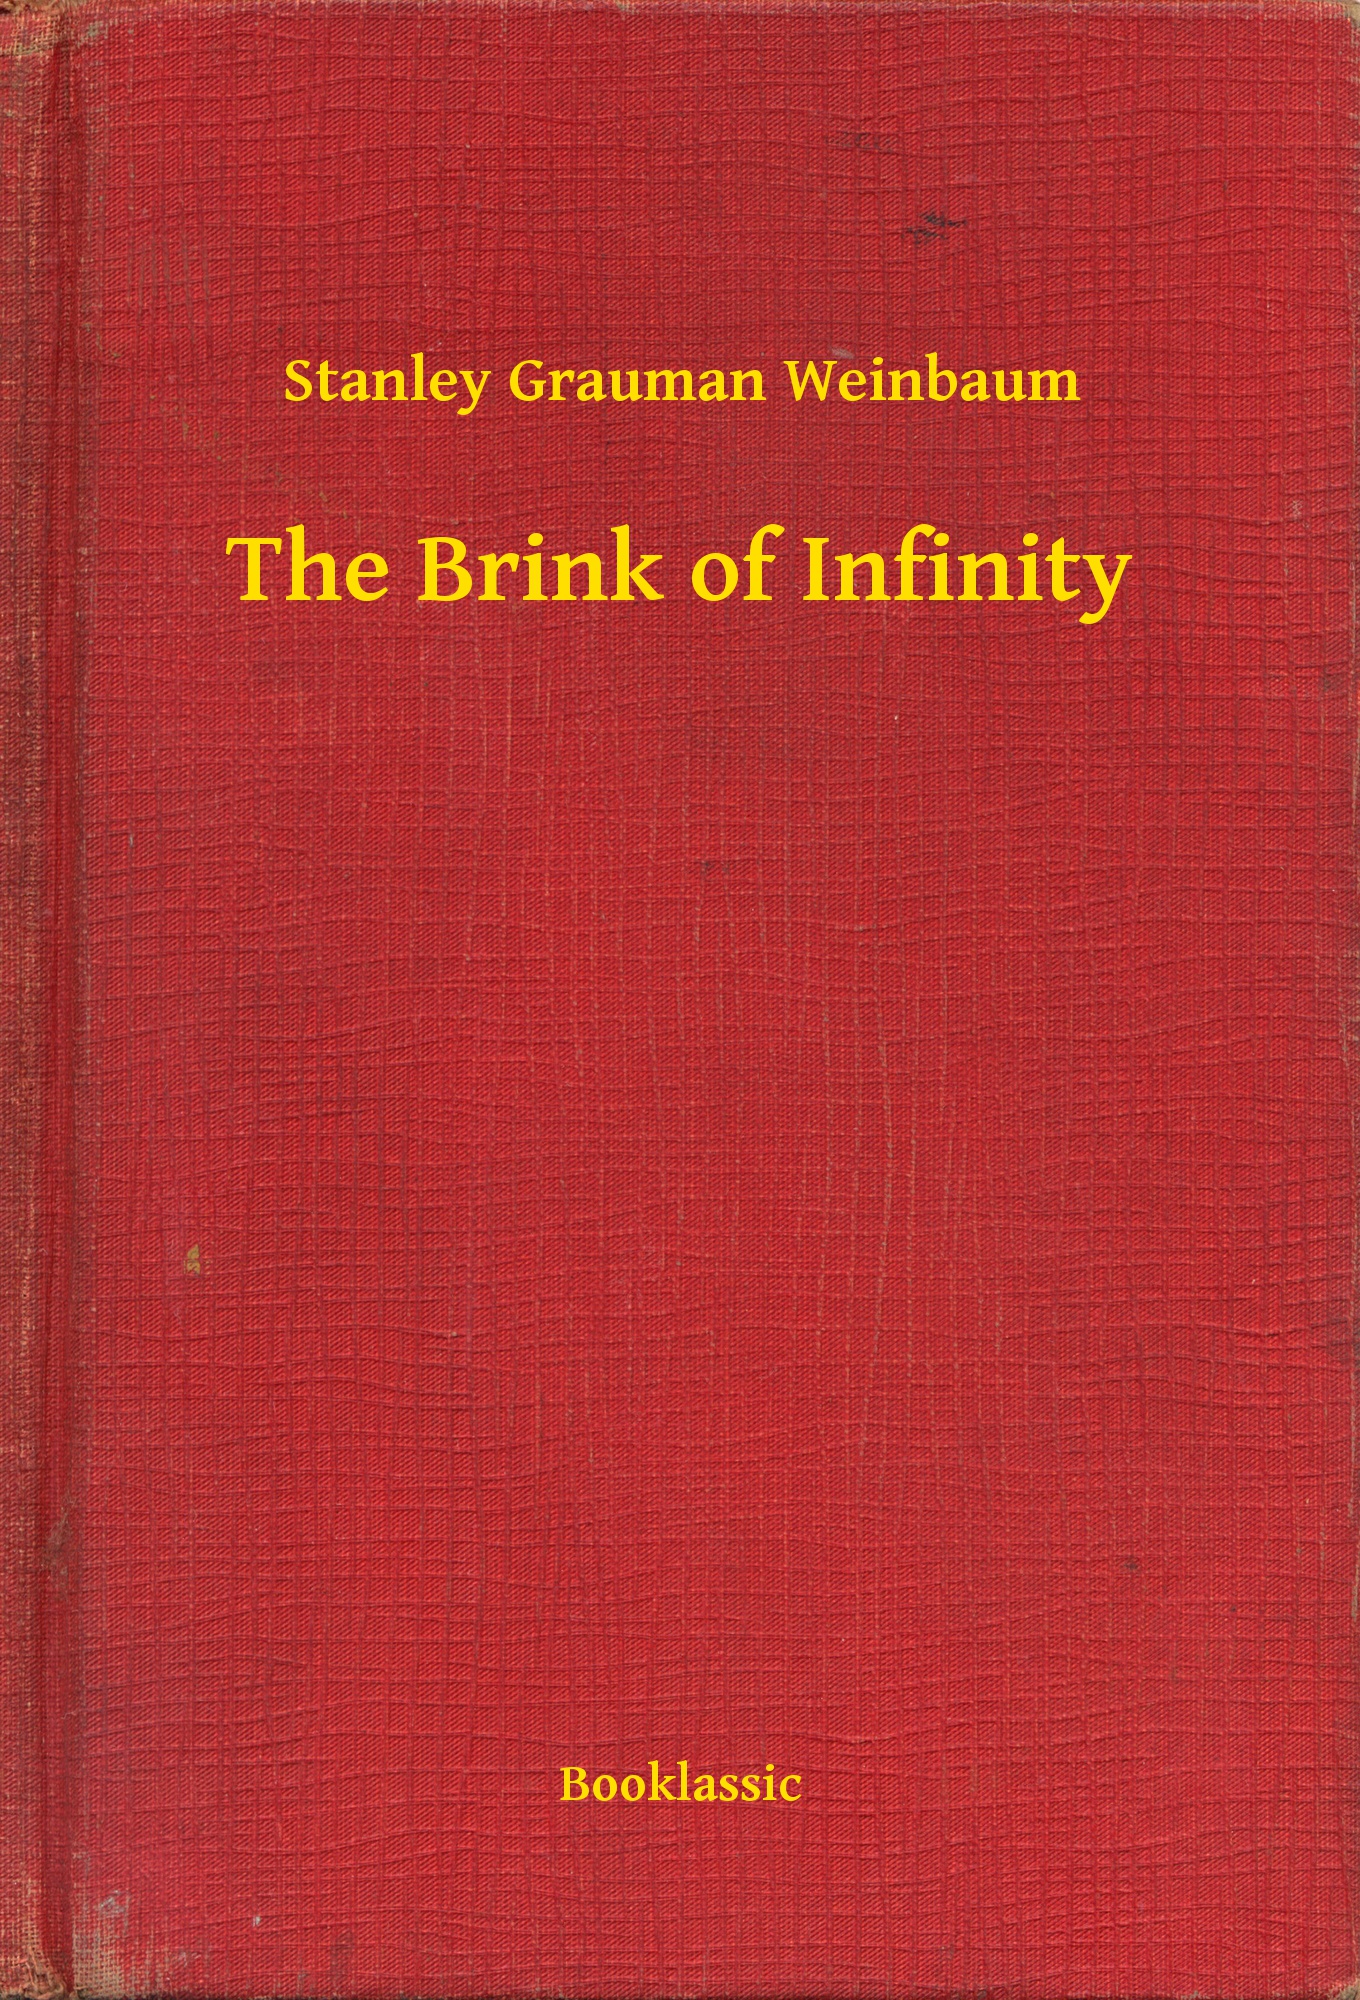 The Brink of Infinity